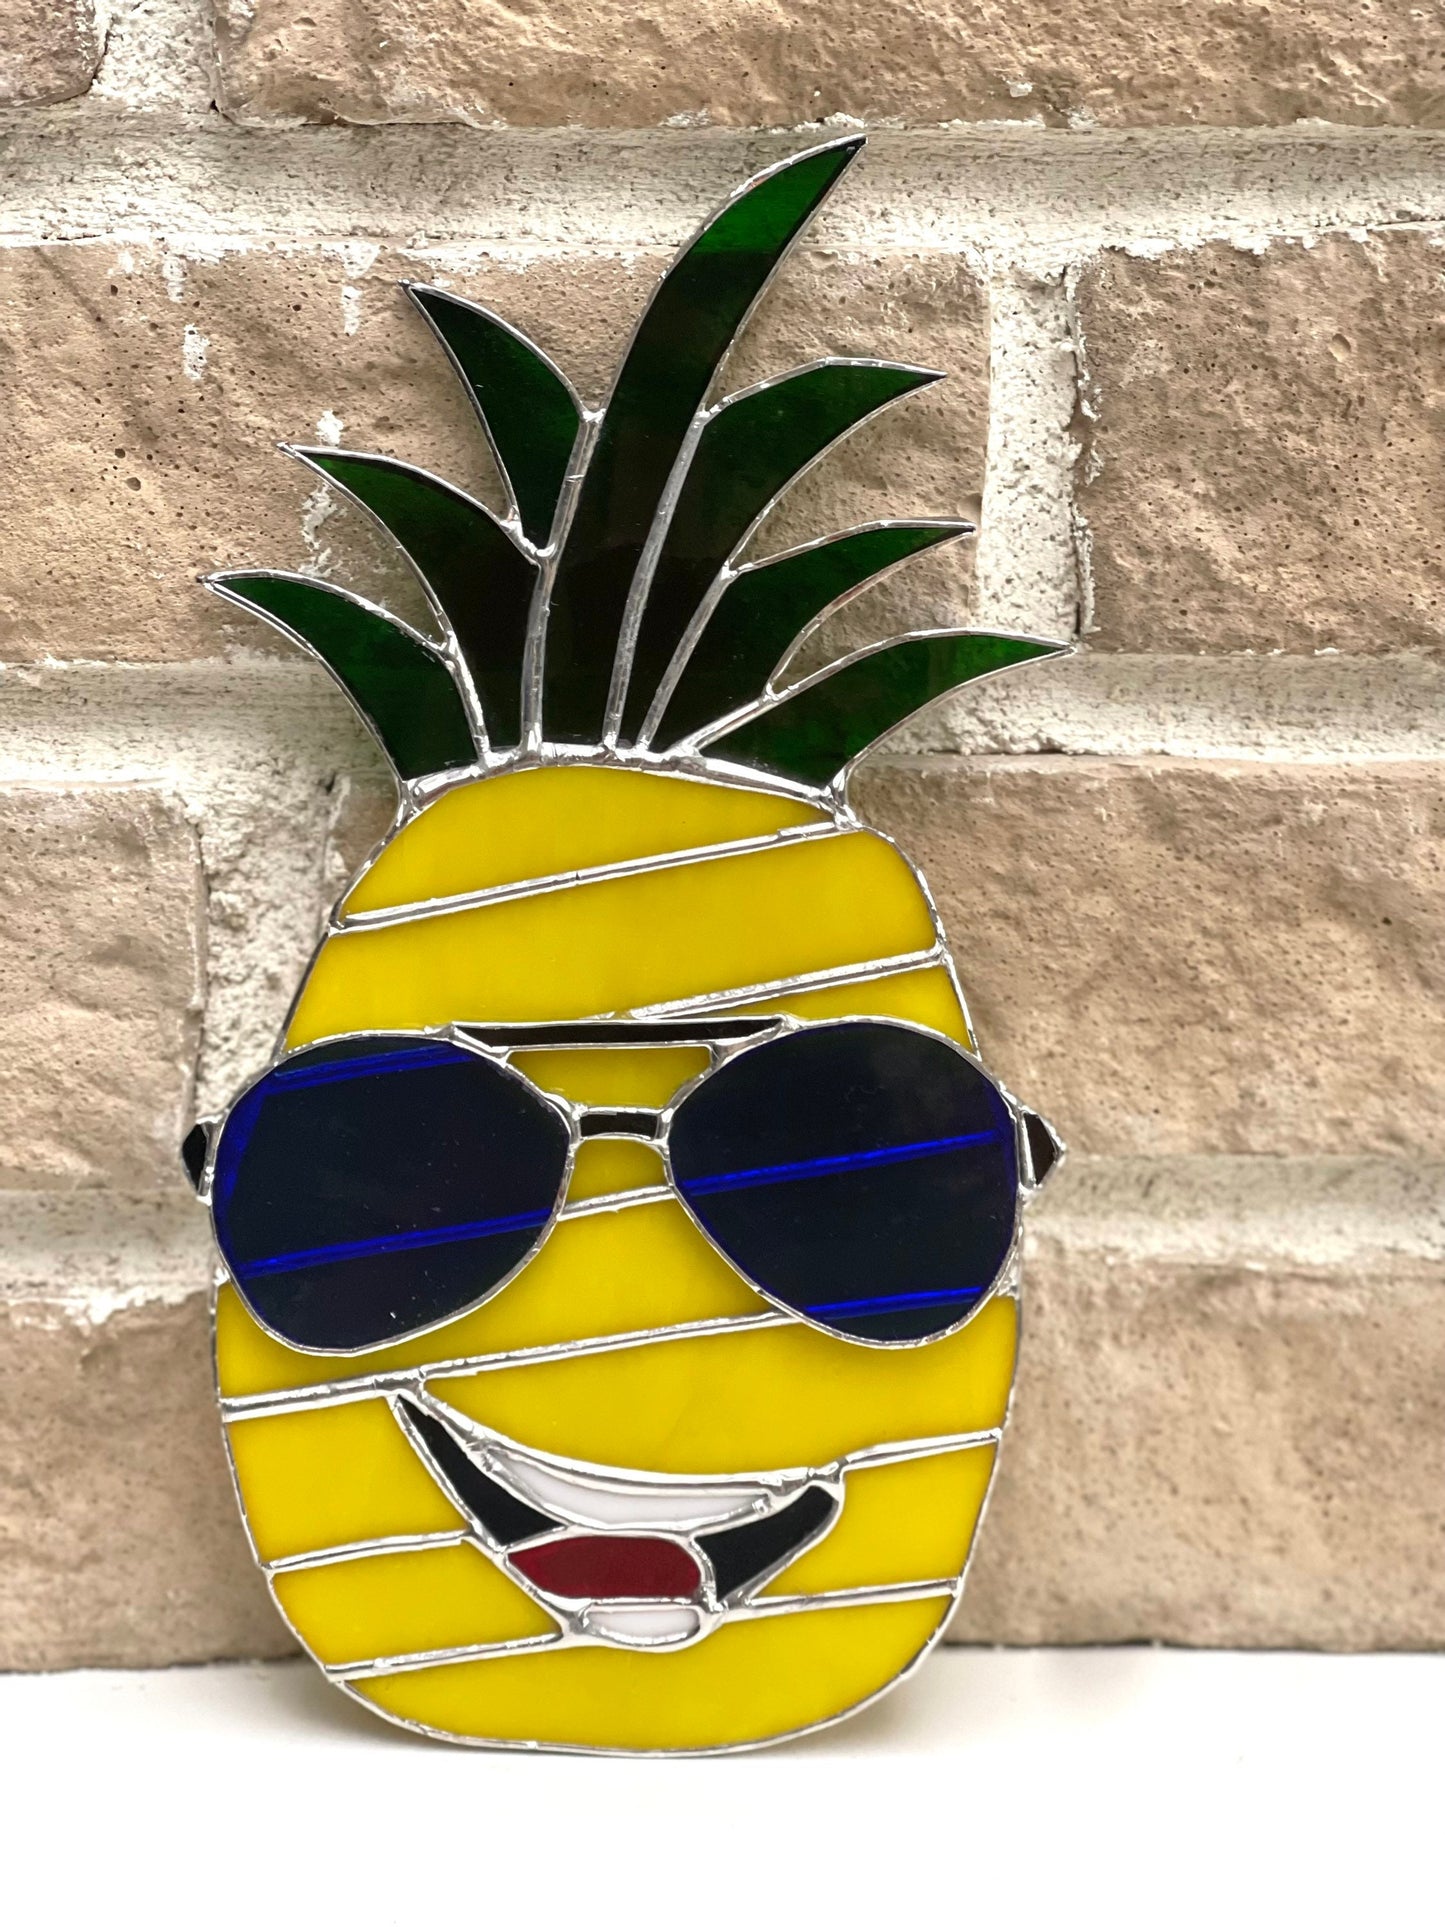 Pineapple Stained Glass Suncatcher • Mr. & Ms. Pineapple Window Hanging • Home Decor